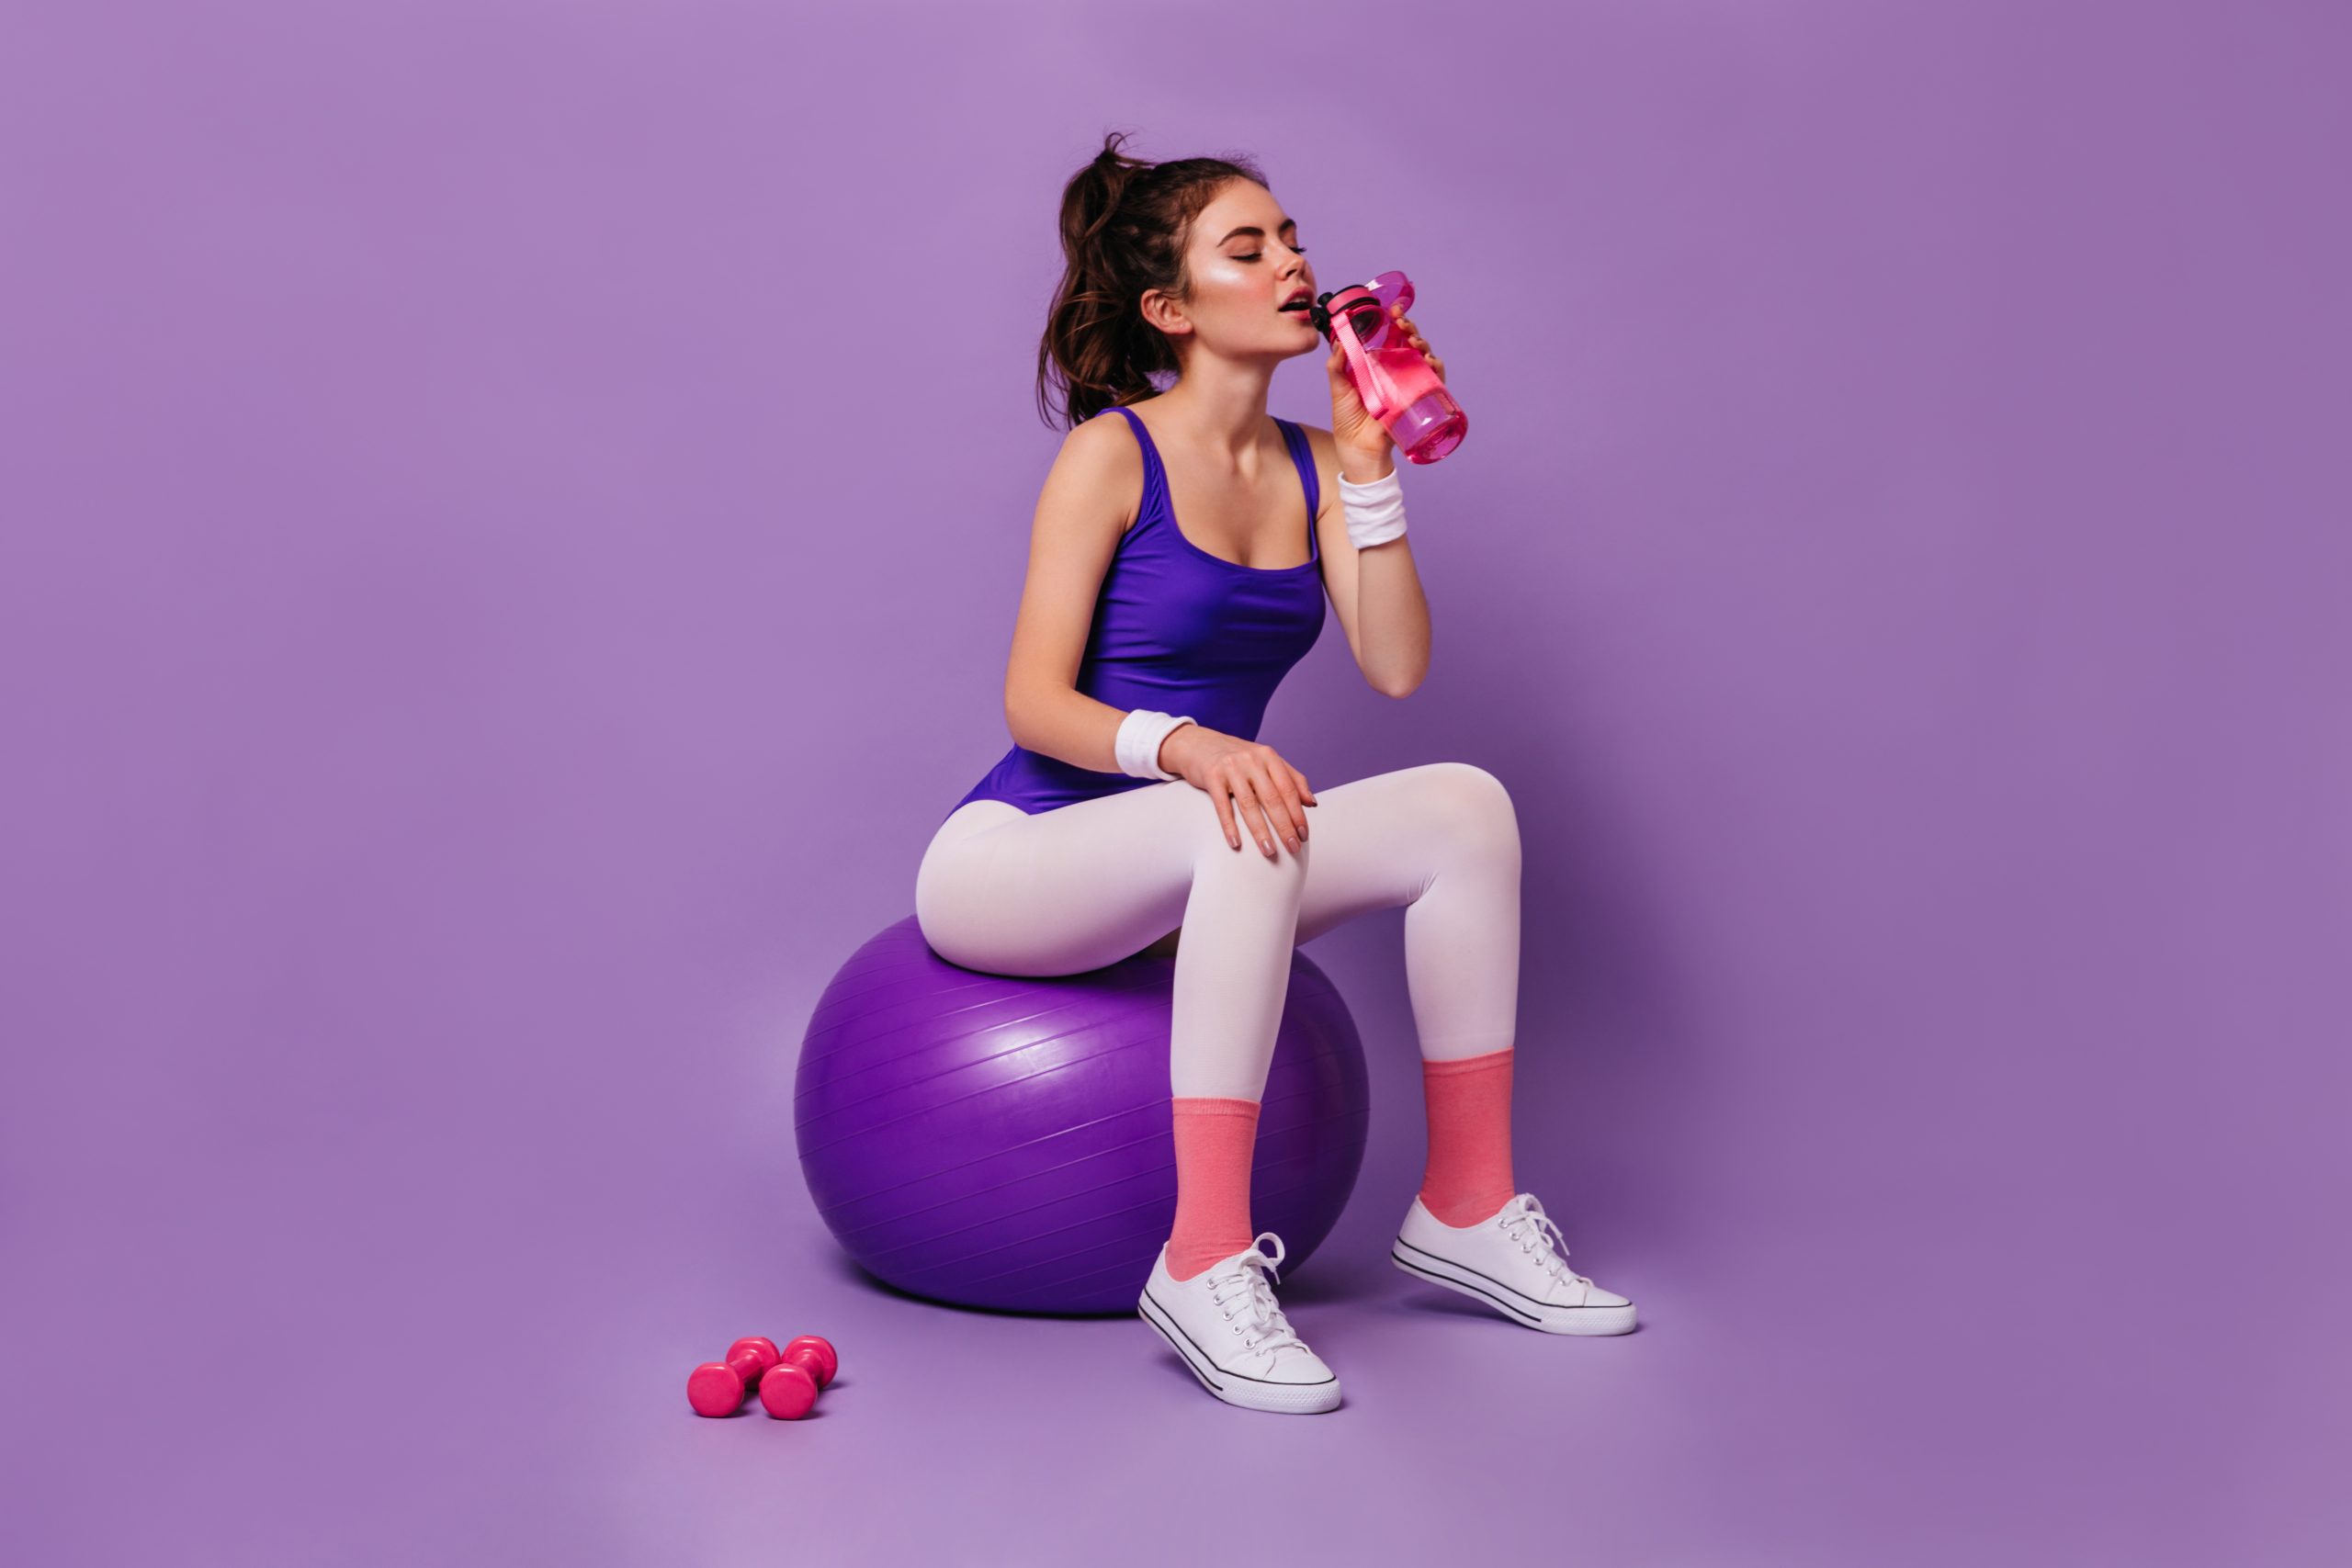 Color matters. Drinking pink drinks increases our exercise performance!